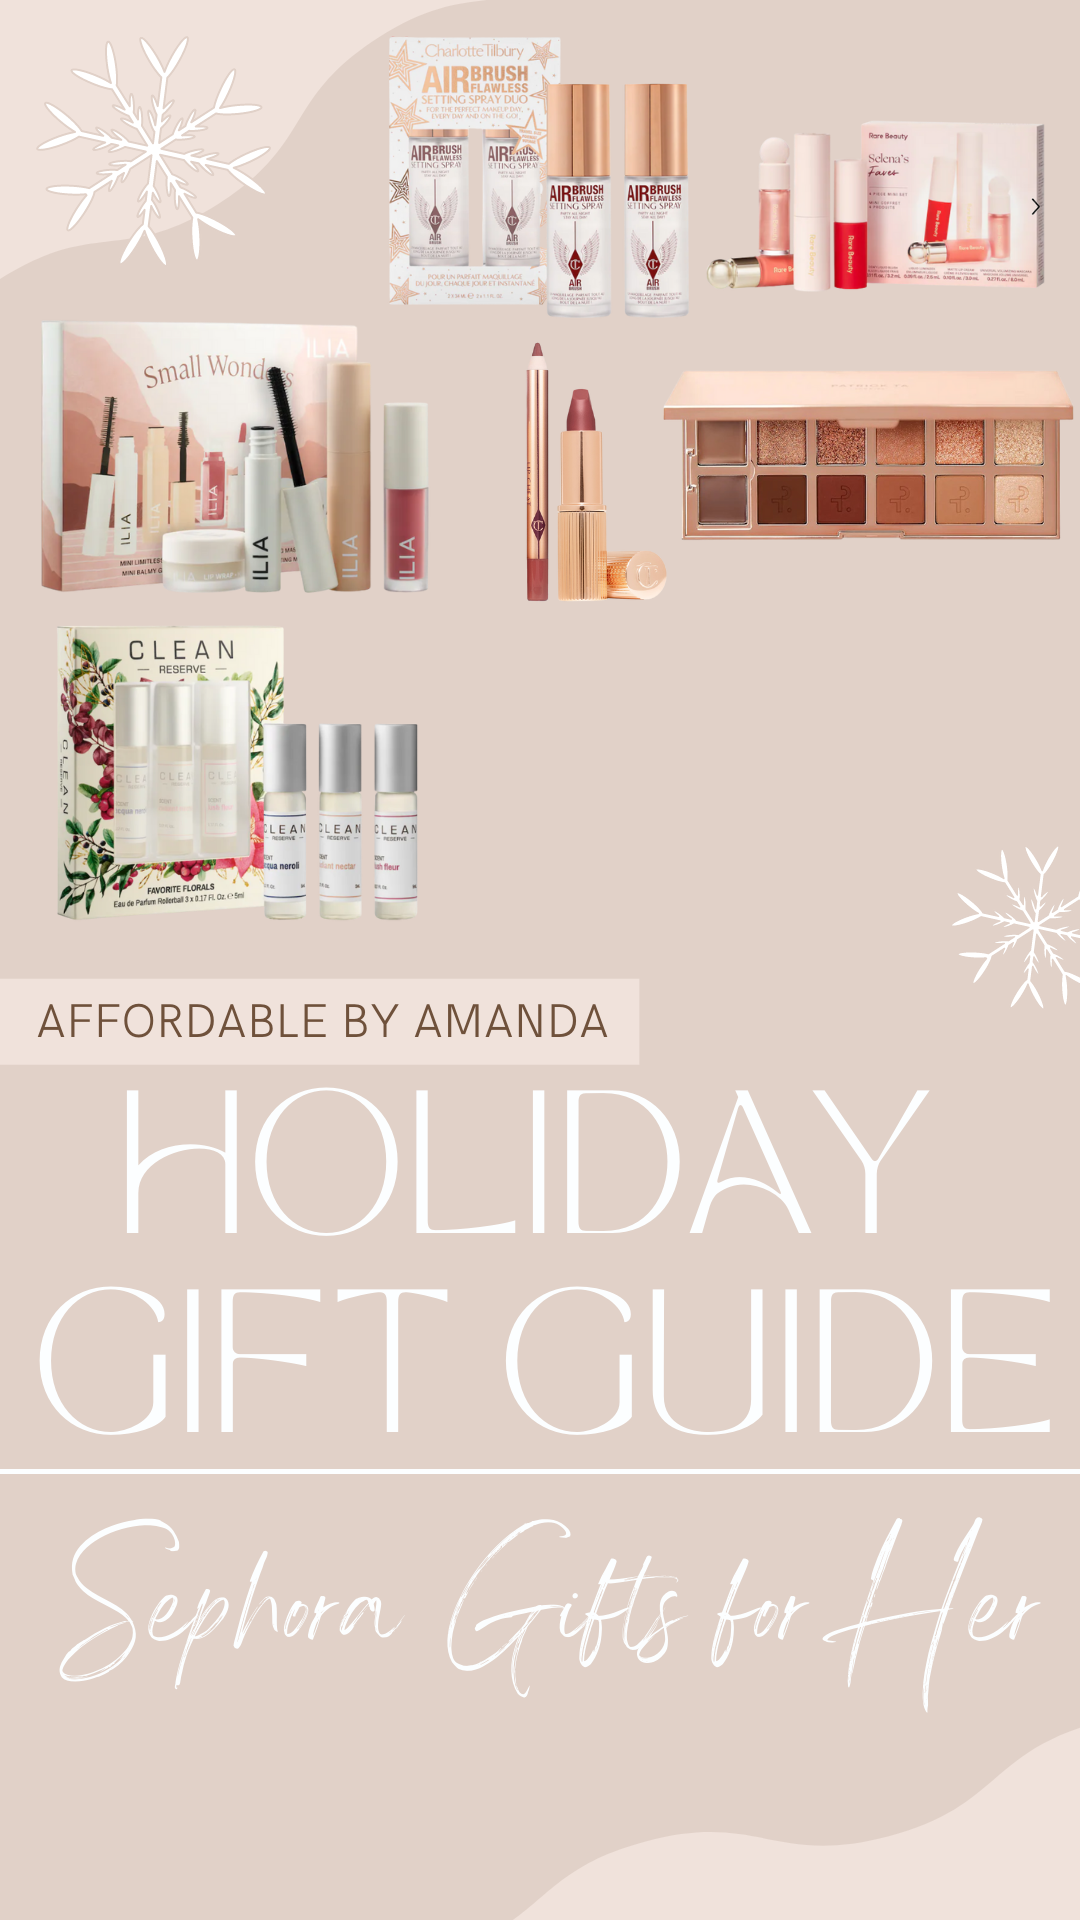 30+ Best Sephora Gifts for Her - Holiday Gift Guide for Her - Holiday Sale at Sephora